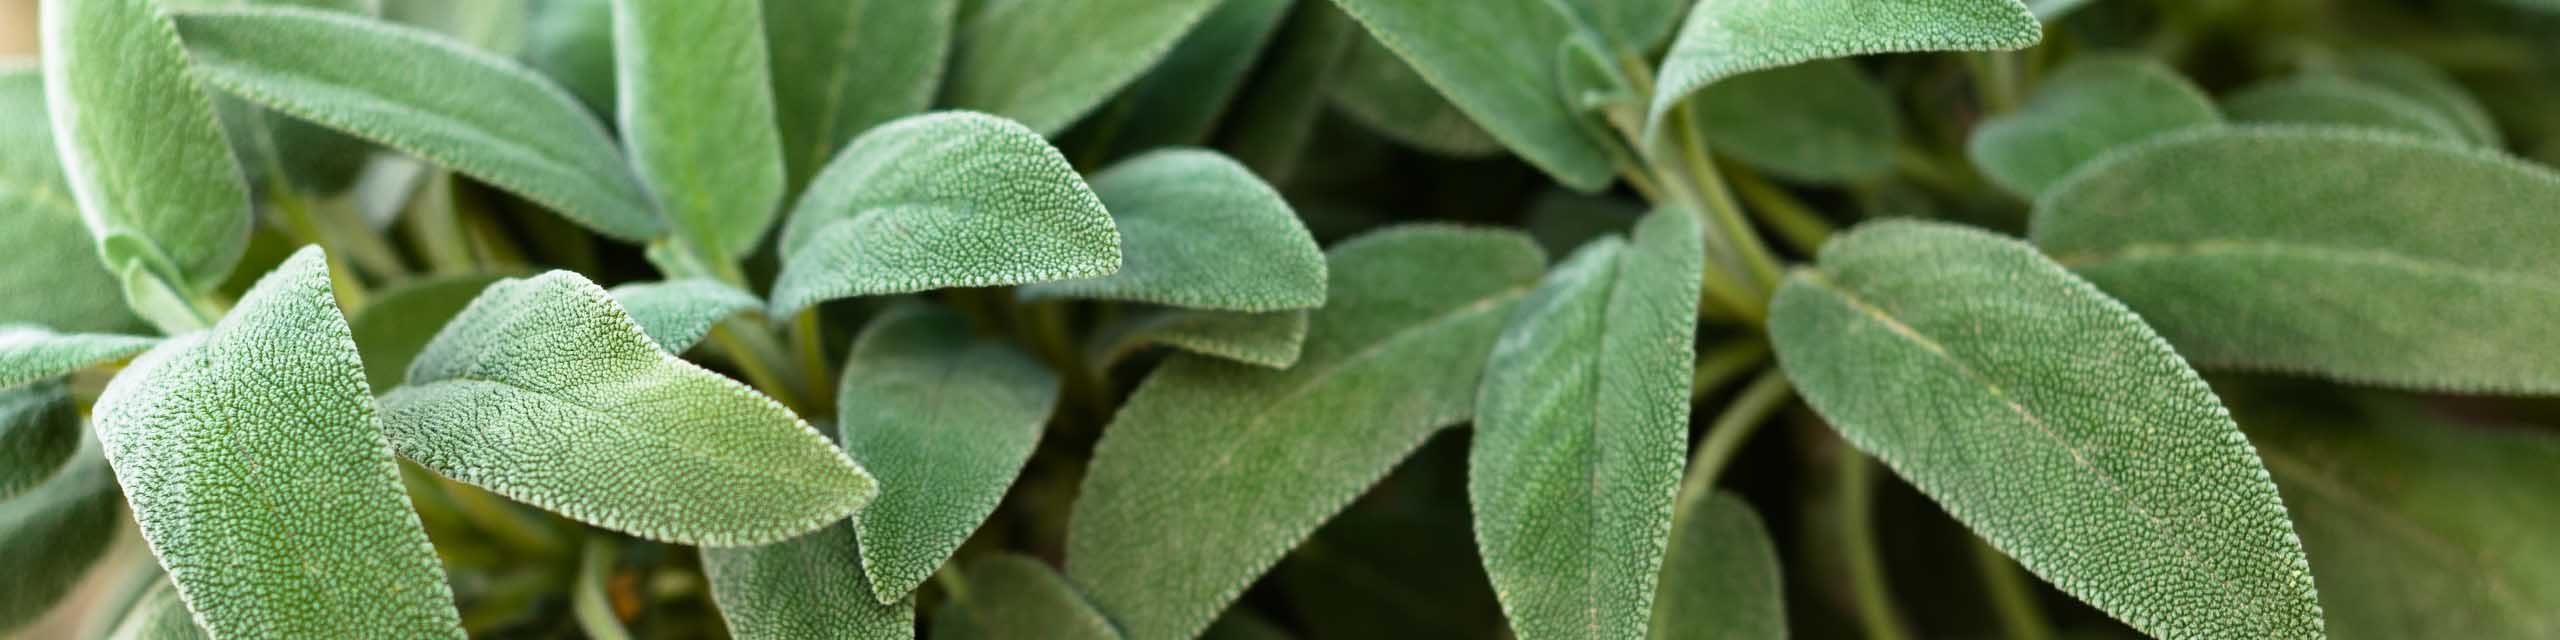 Close up of culinary sage plants growing in a herb garden.